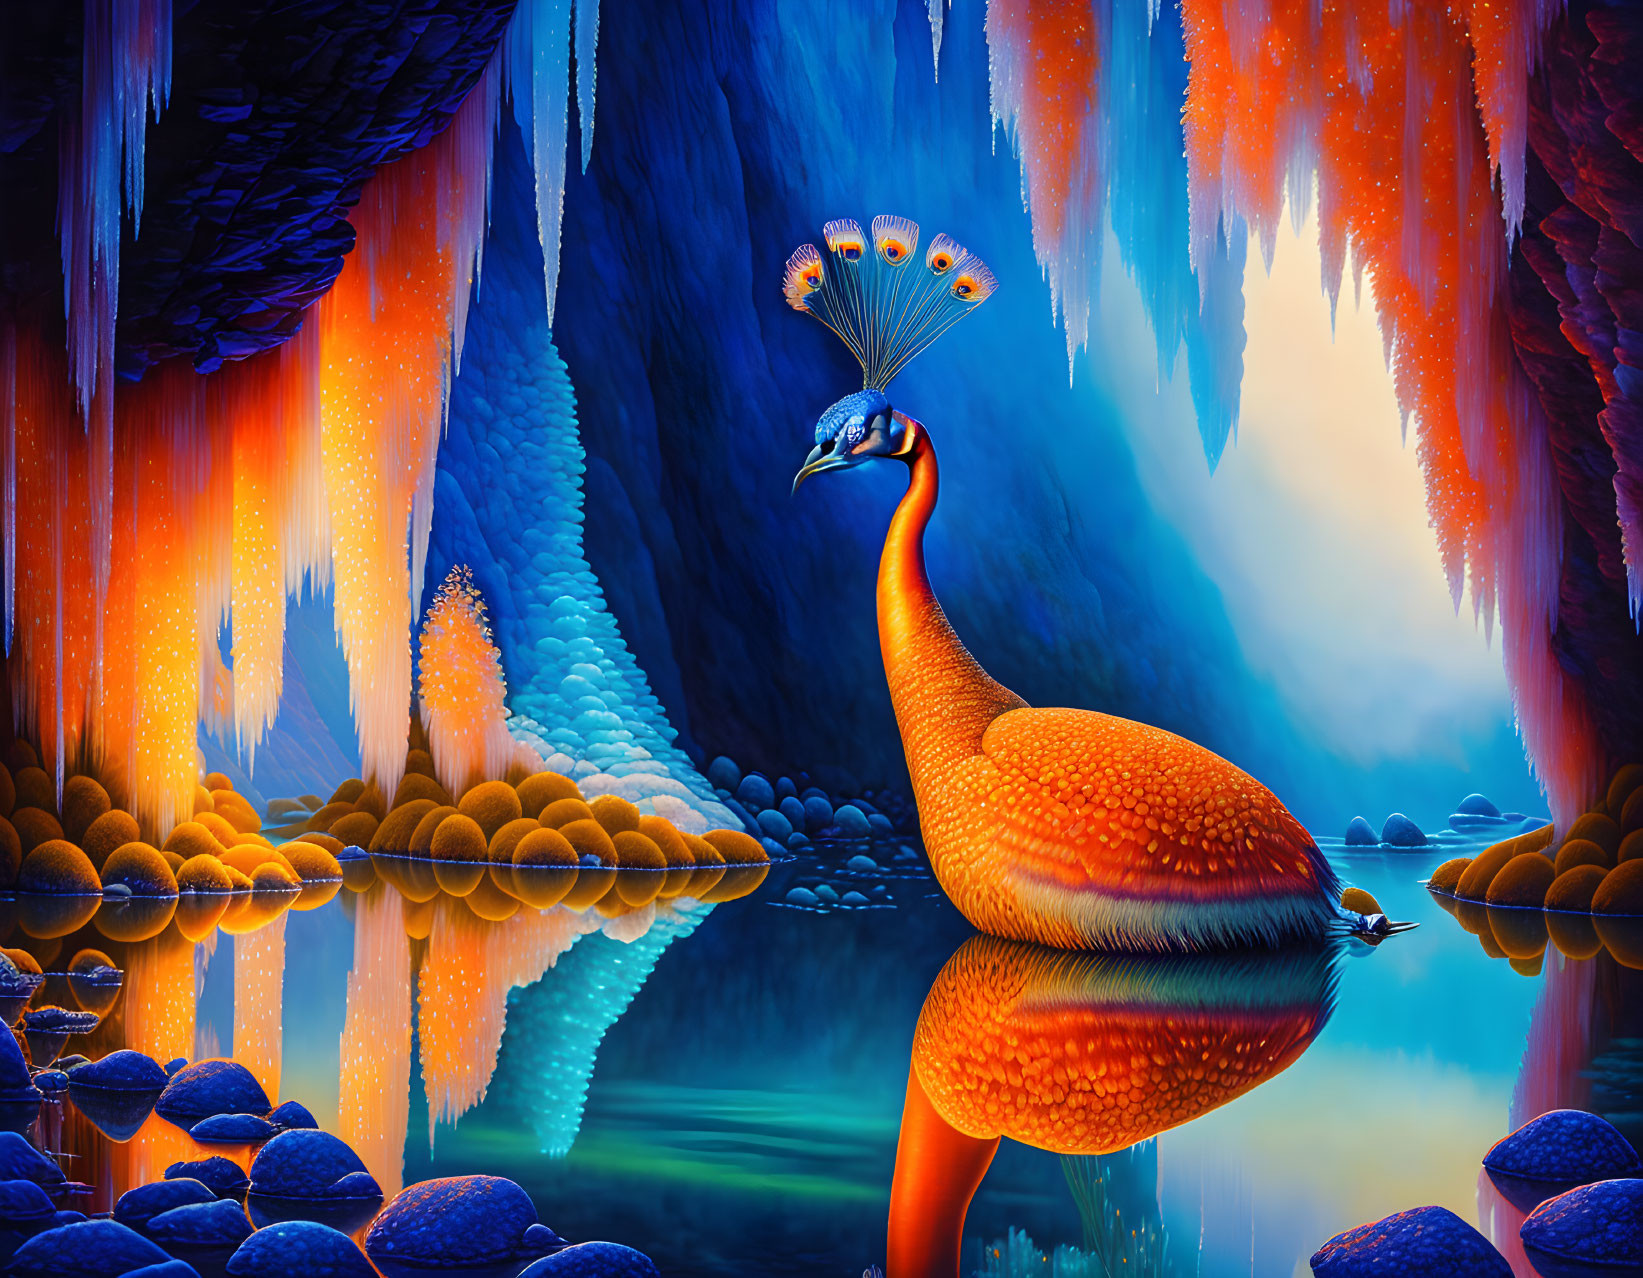 Colorful Peacock Art in Blue and Orange Cave Landscape